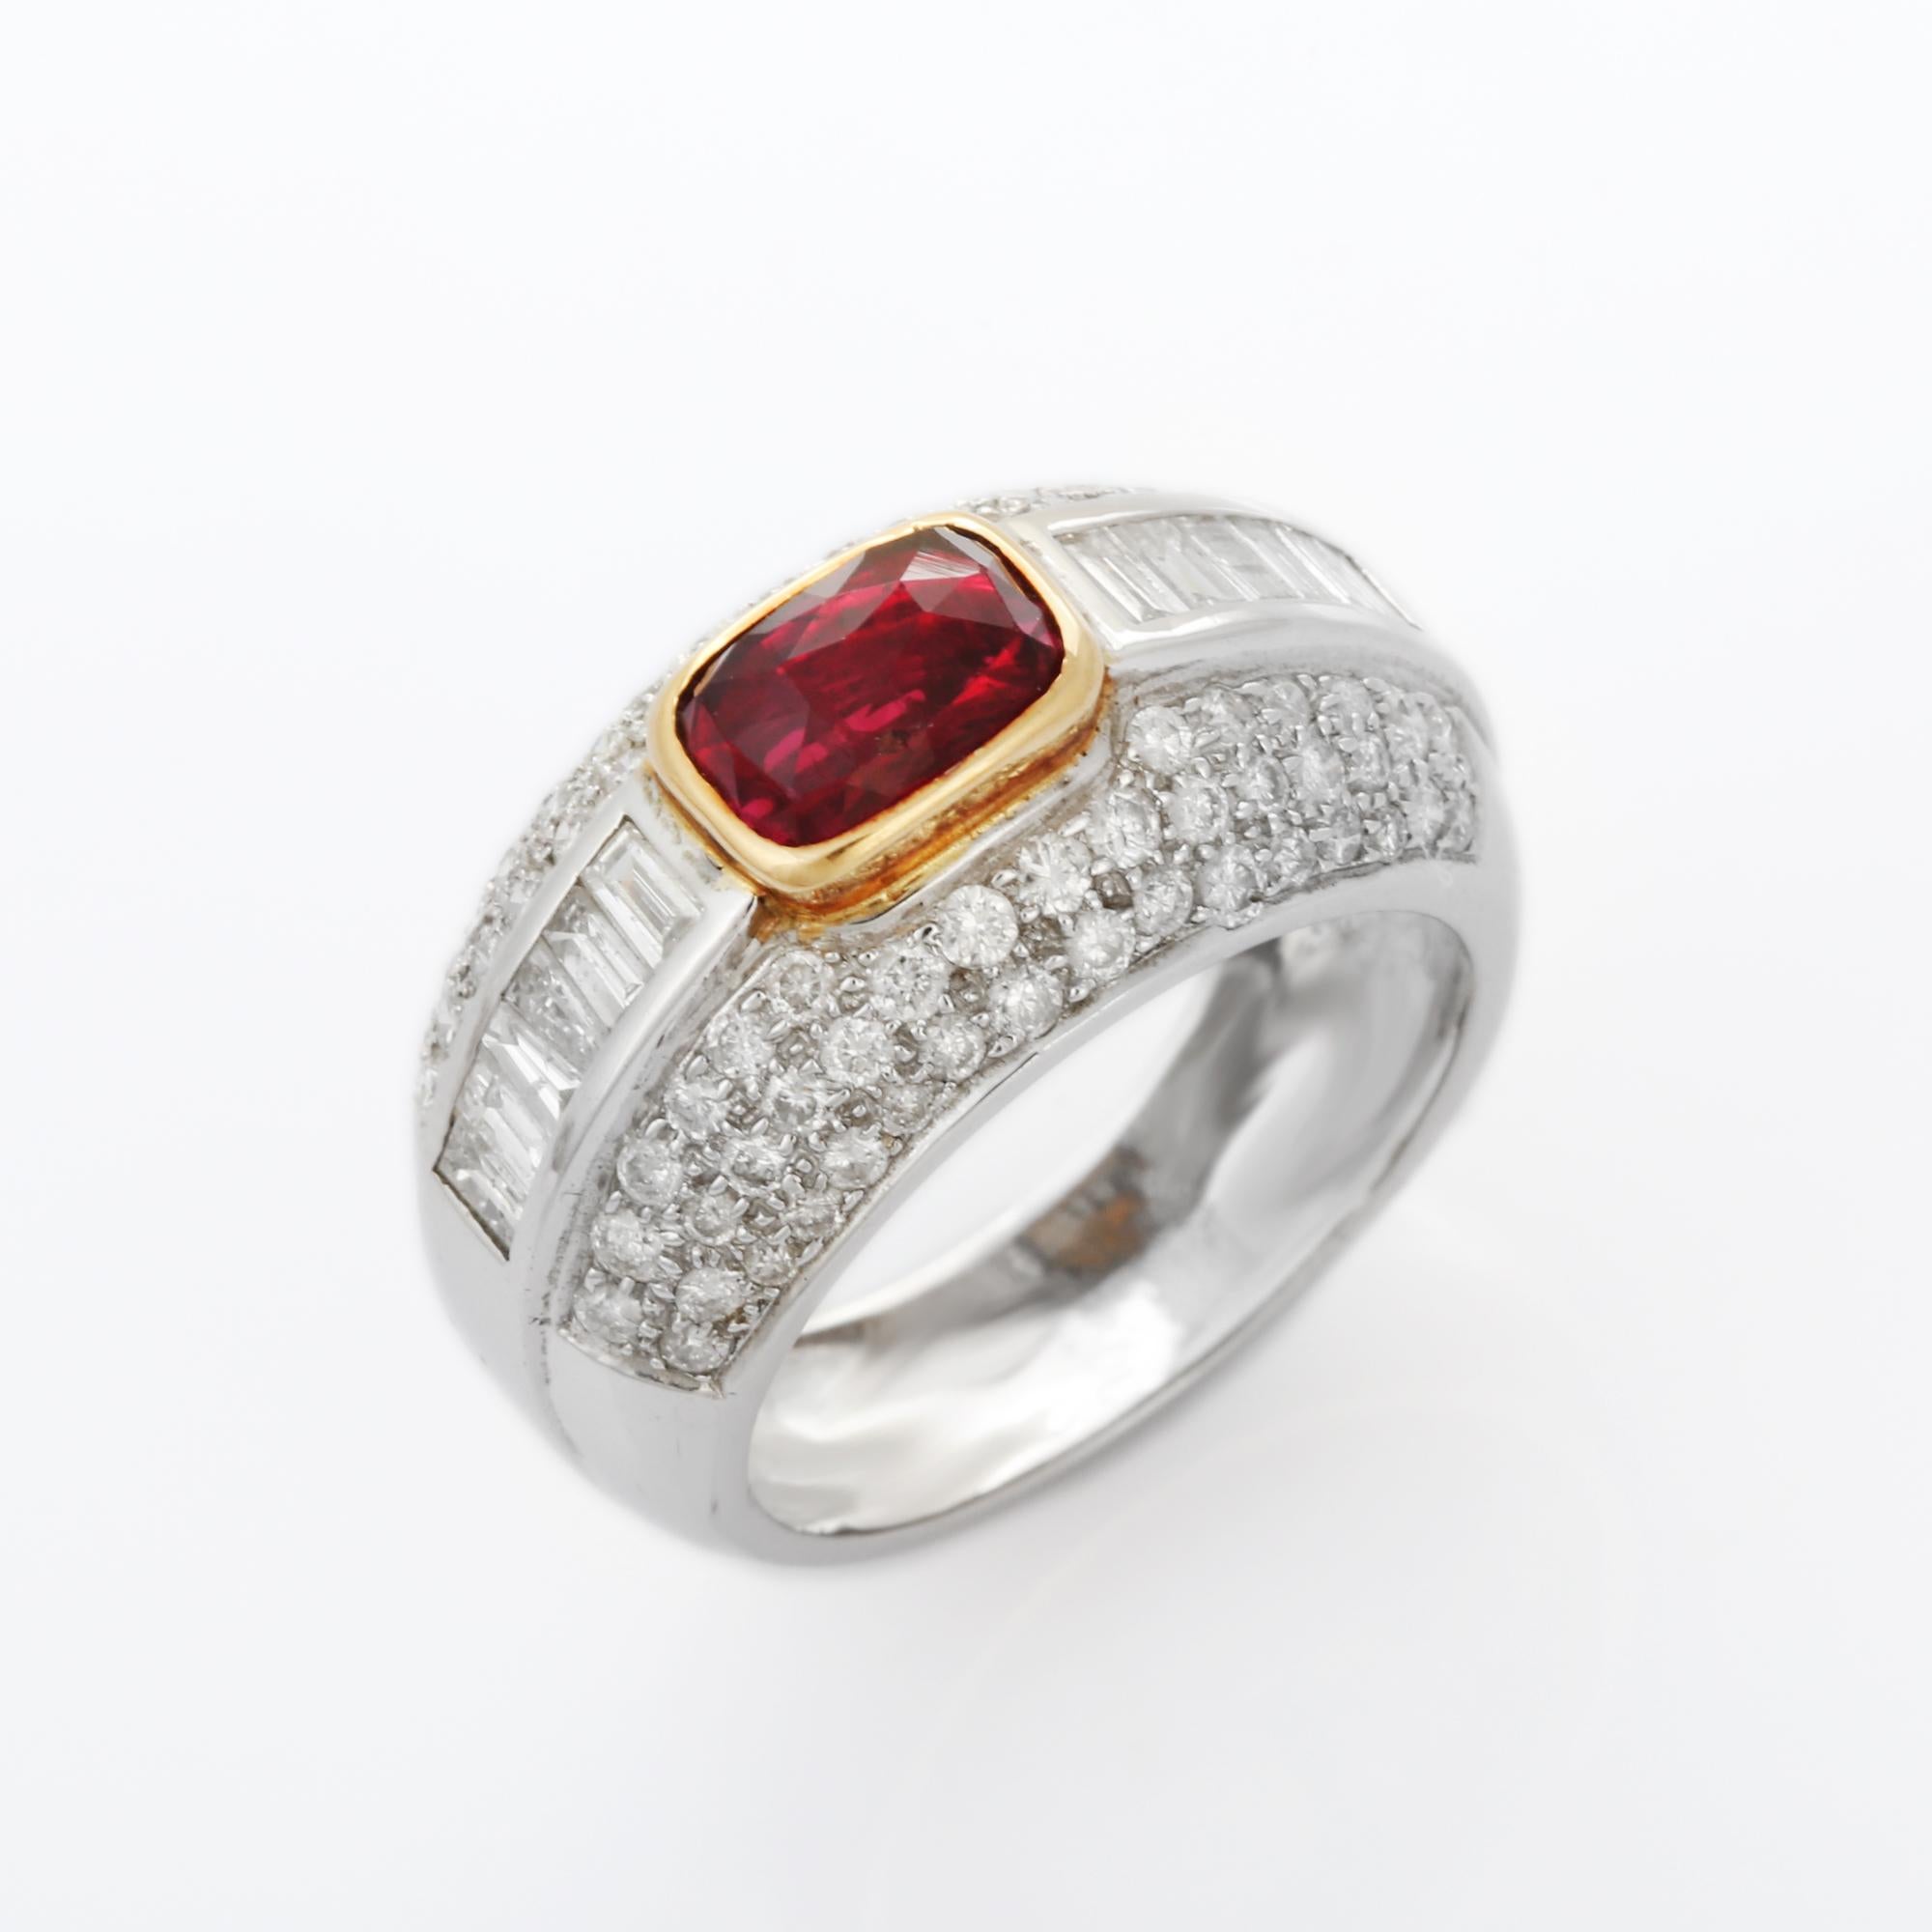 For Sale:  Natural Cushion Cut Ruby and Diamond Cluster Ring in 18K White Gold  14